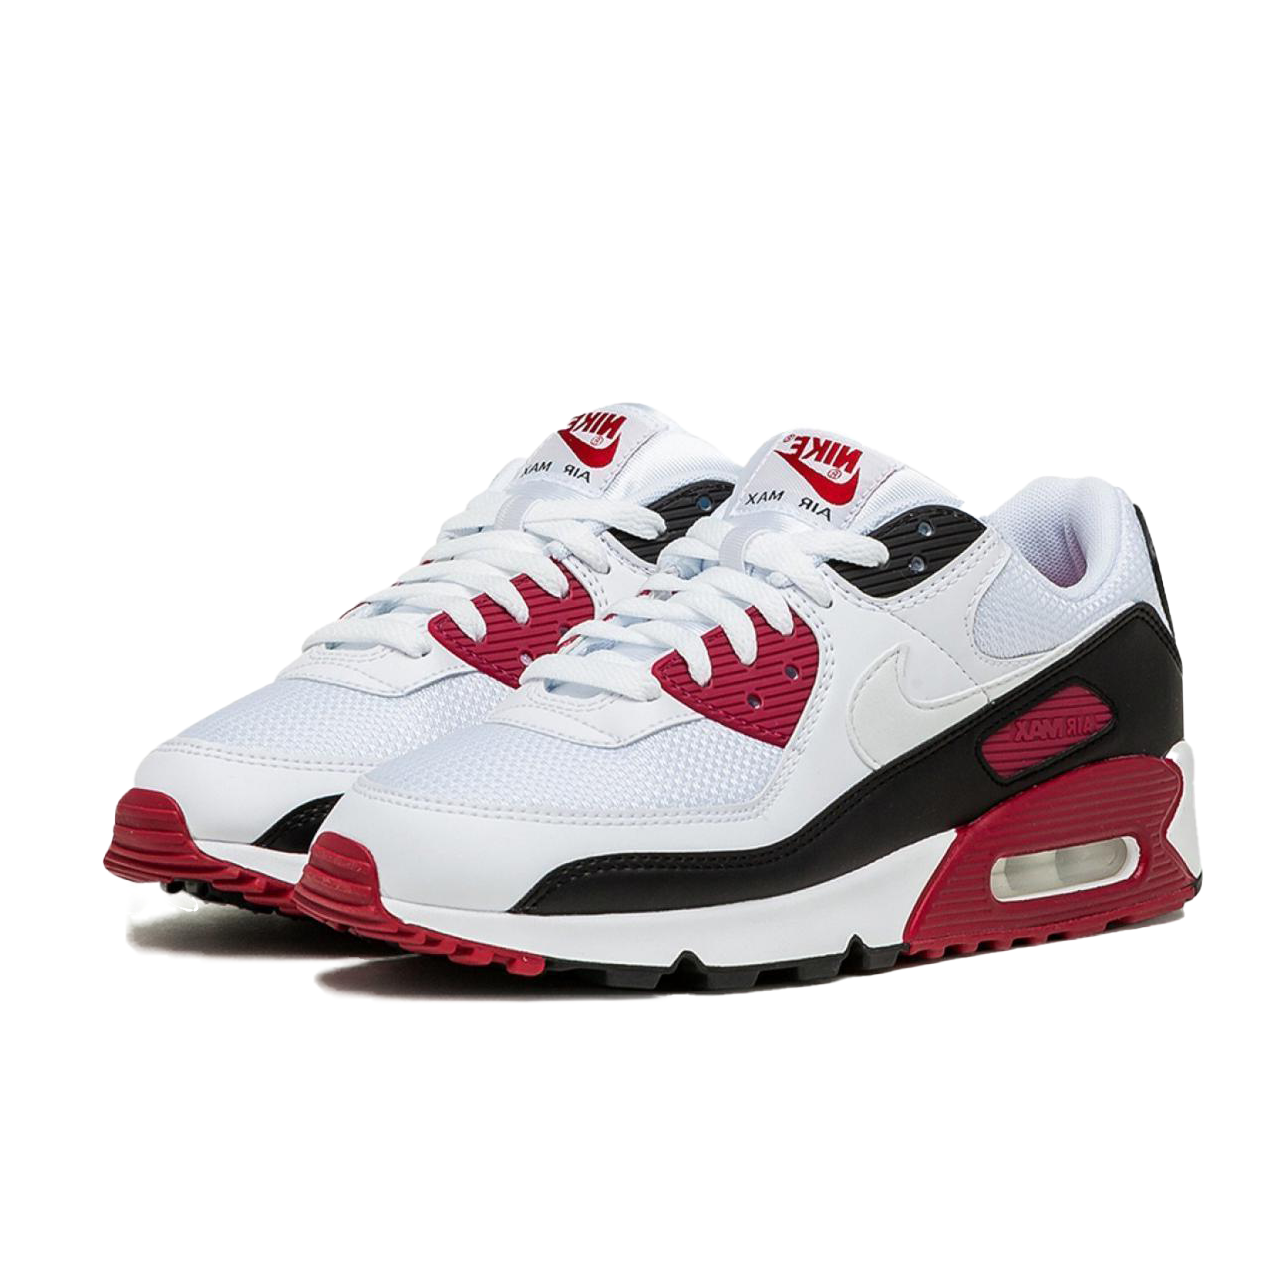 https://admin.thegioigiay.com/upload/product/2022/12/giay-the-thao-nike-air-max-90-recraft-new-maroon-size-44-63913bb454a51-08122022081948.png